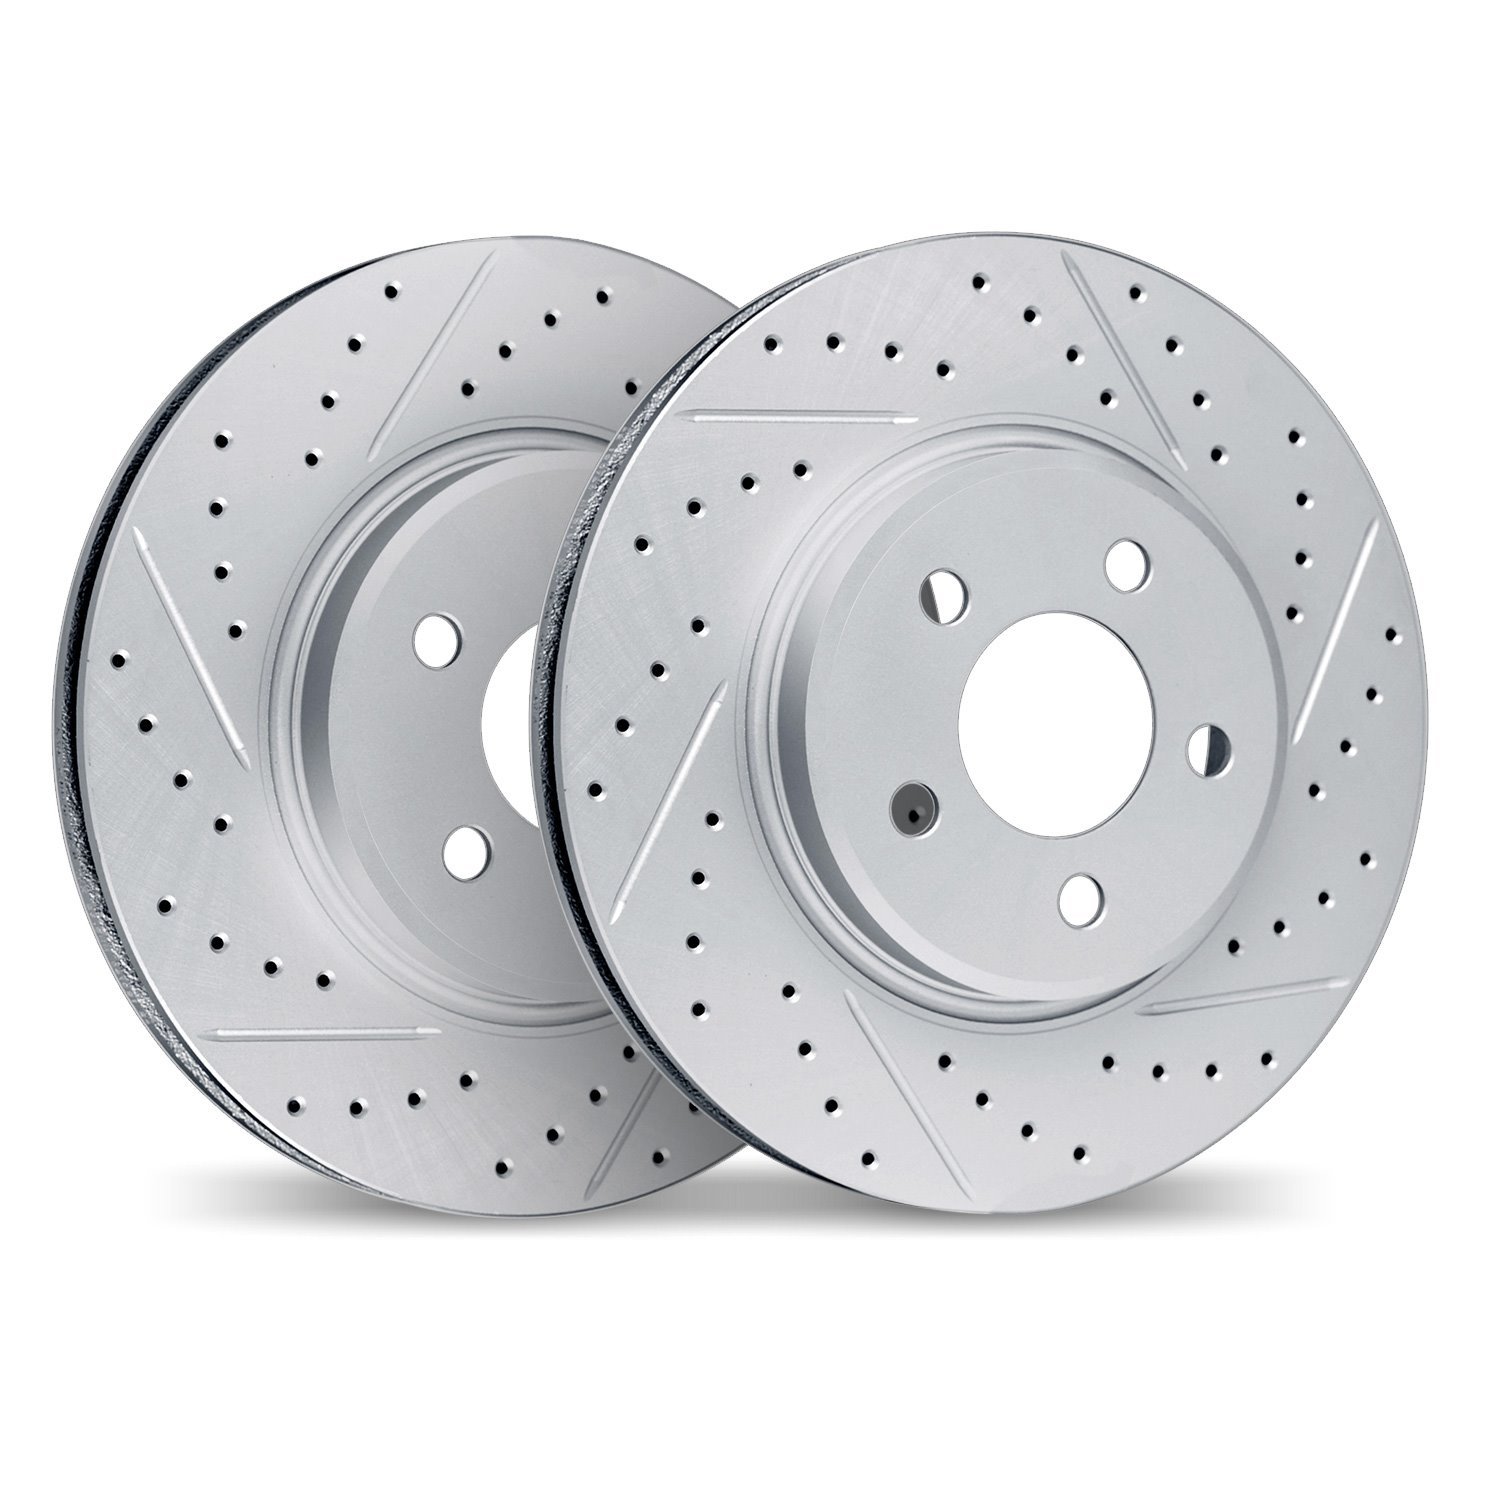 2002-31044 Geoperformance Drilled/Slotted Brake Rotors, 2002-2006 BMW, Position: Front